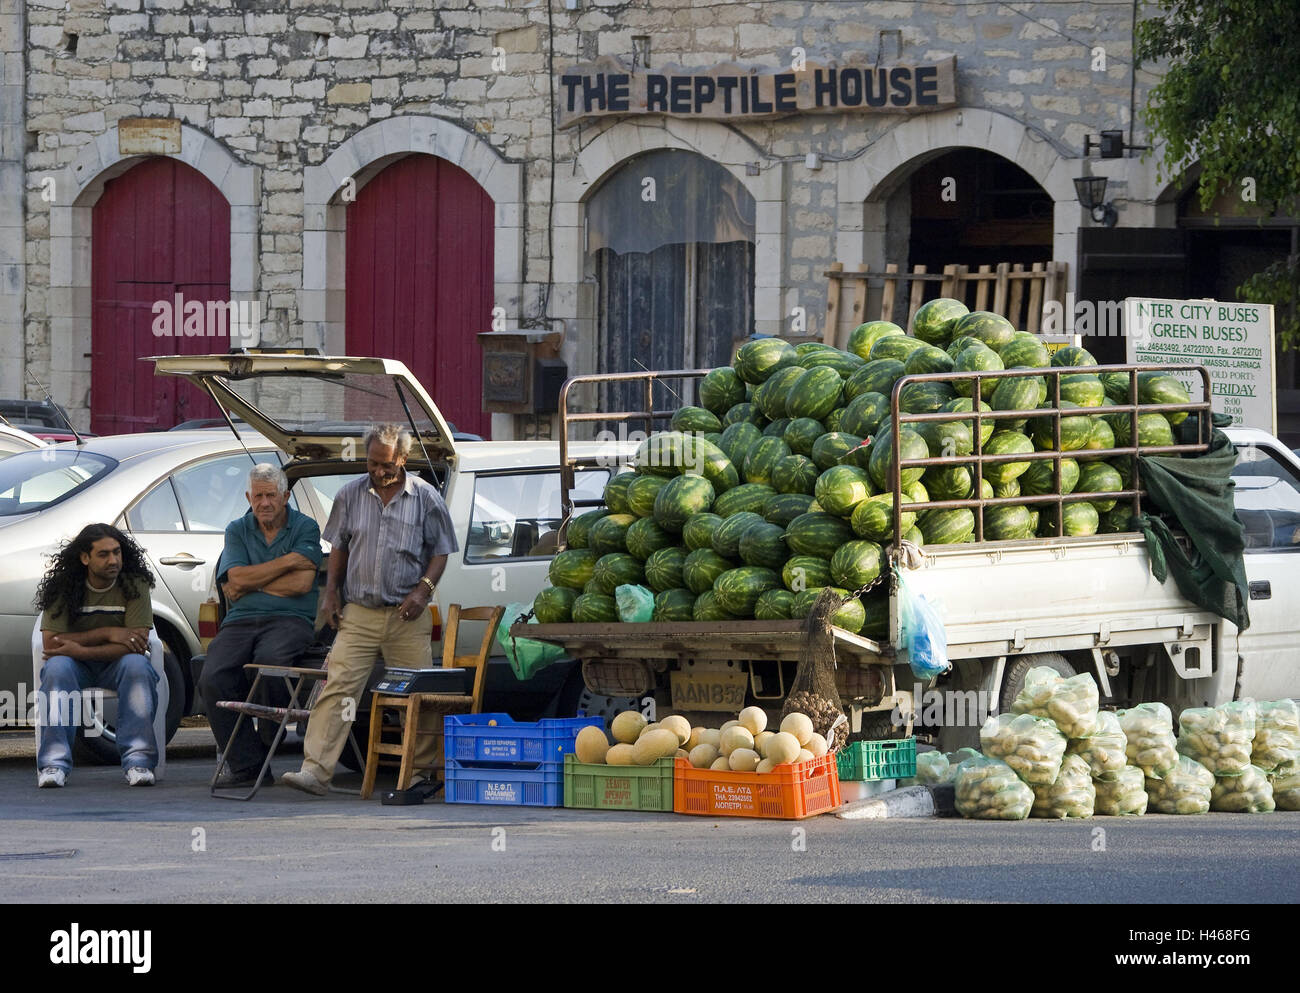 Cyprus, Limassol, reptile house, parking space, farmers, street vendors, melons, potatoes, Southern Cyprus, Lemesos, city, town, greek, buy, buy, trade, traders, agribusiness, agriculture, watermelons, cantaloupes, many offer, wait Men people locals truck Stock Photo